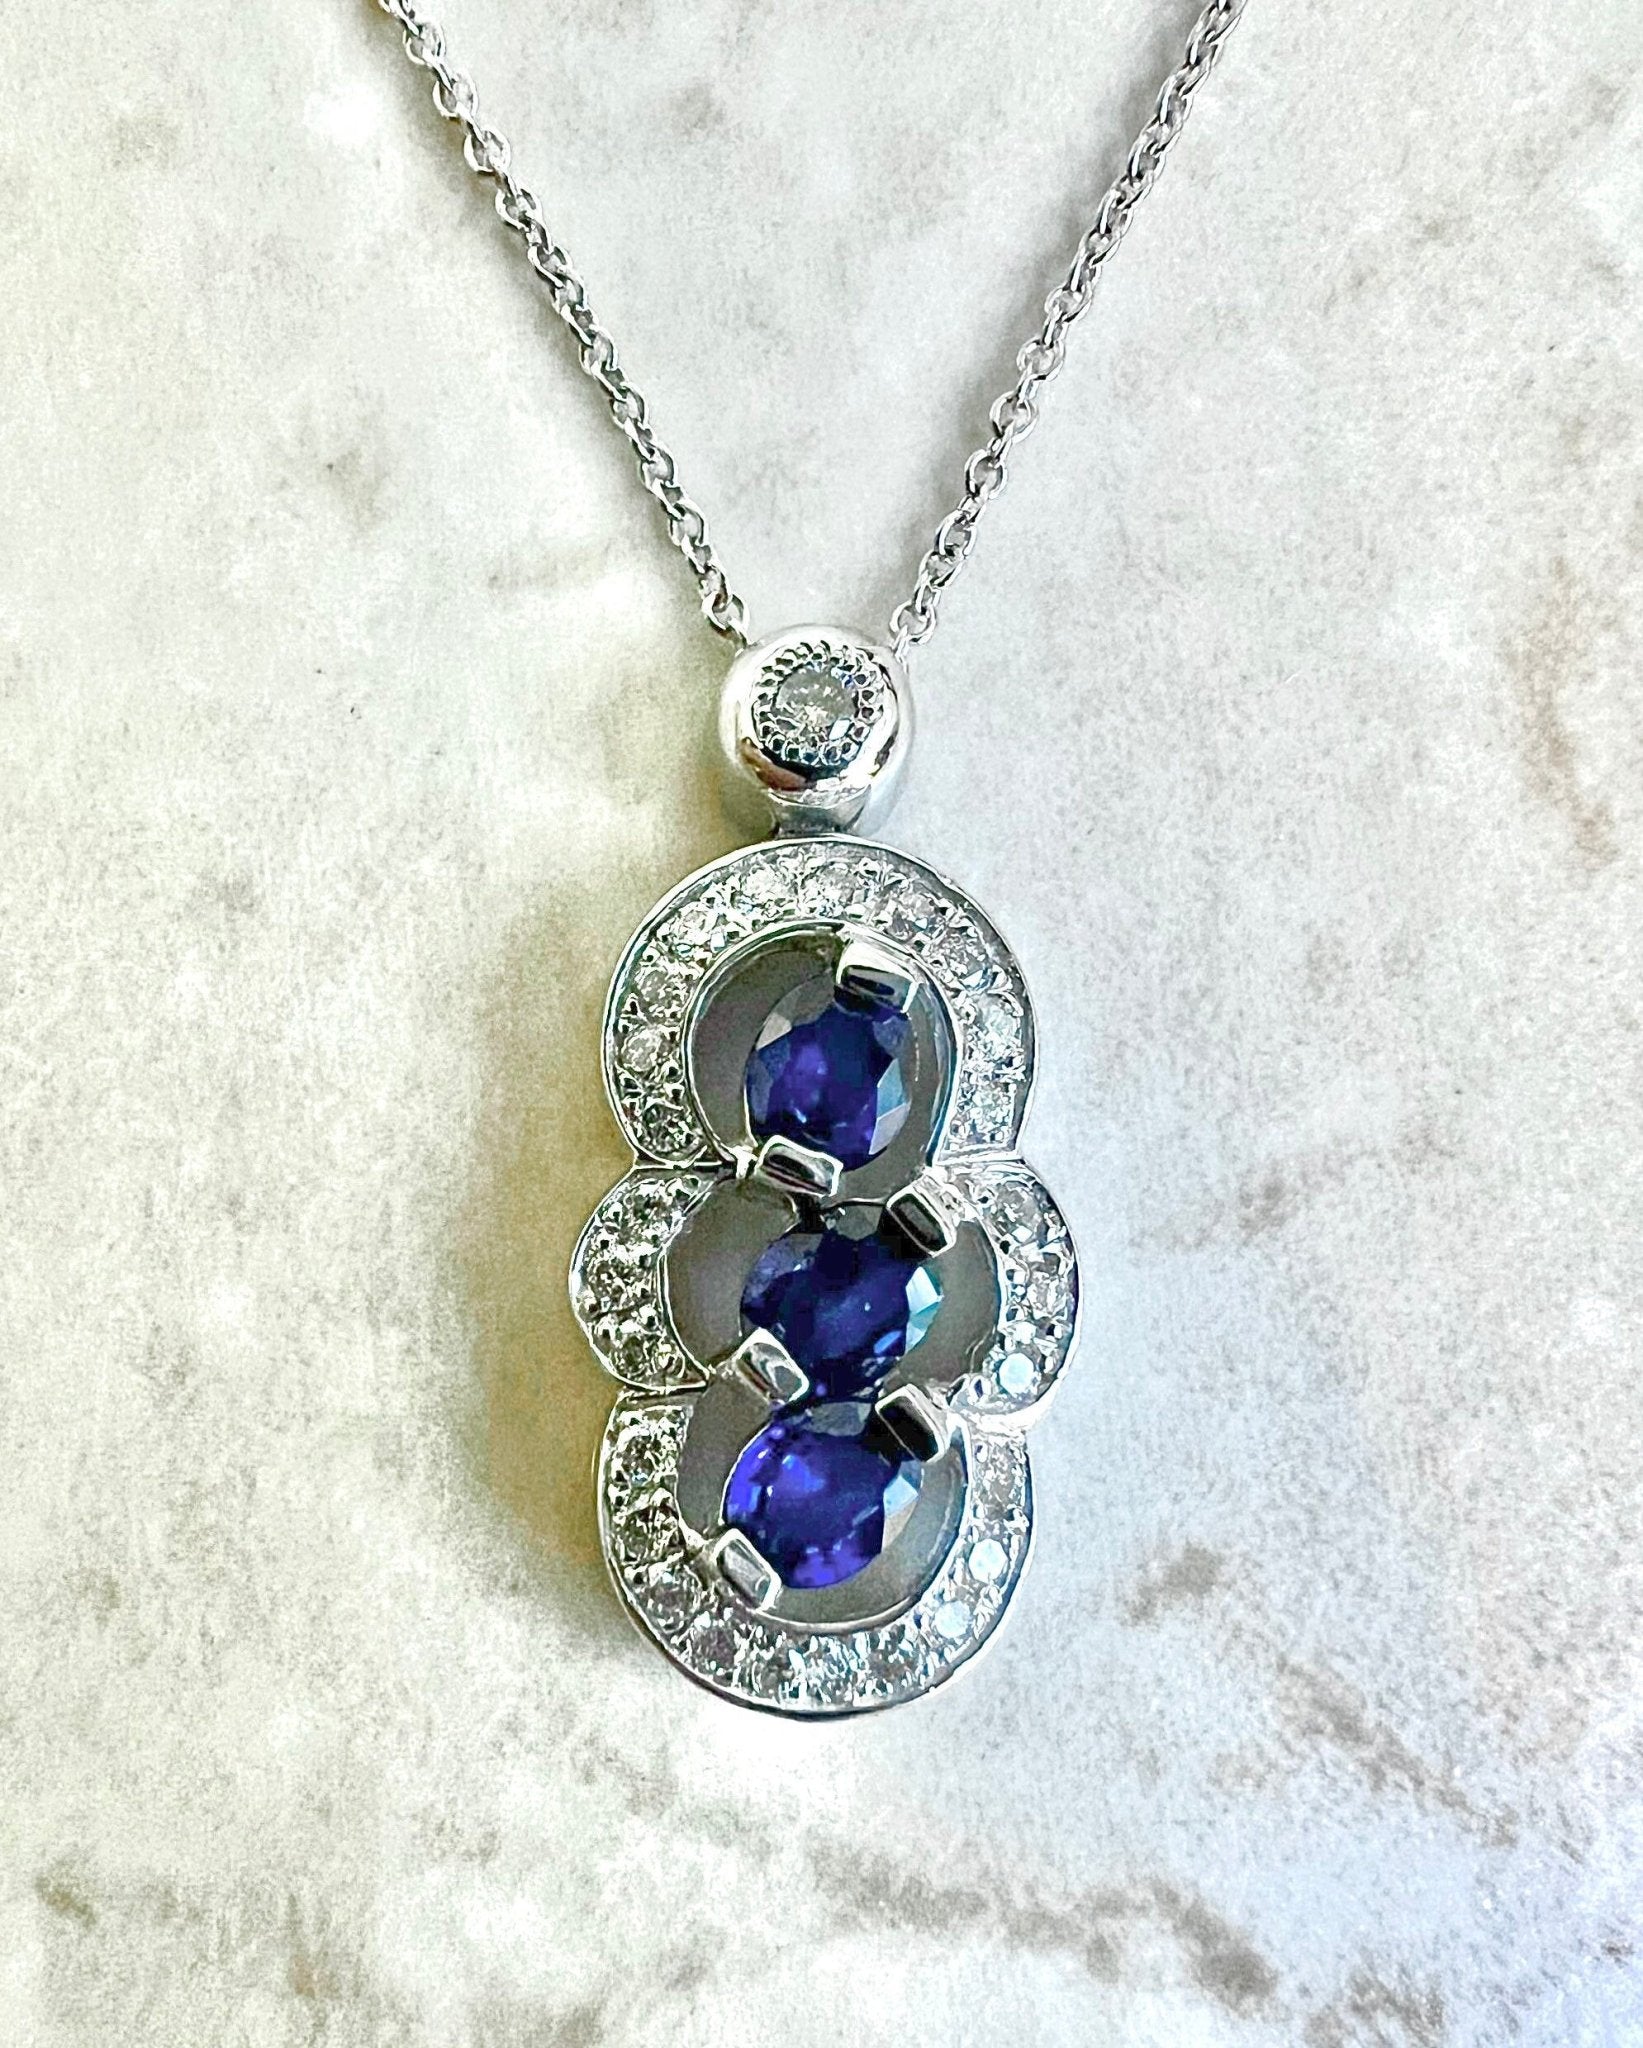 14K Halo Diamond & Sapphire 3 Stone Pendant Necklace - Halo Sapphire Necklace - April September Birthstone Necklace - Best Gifts For Her